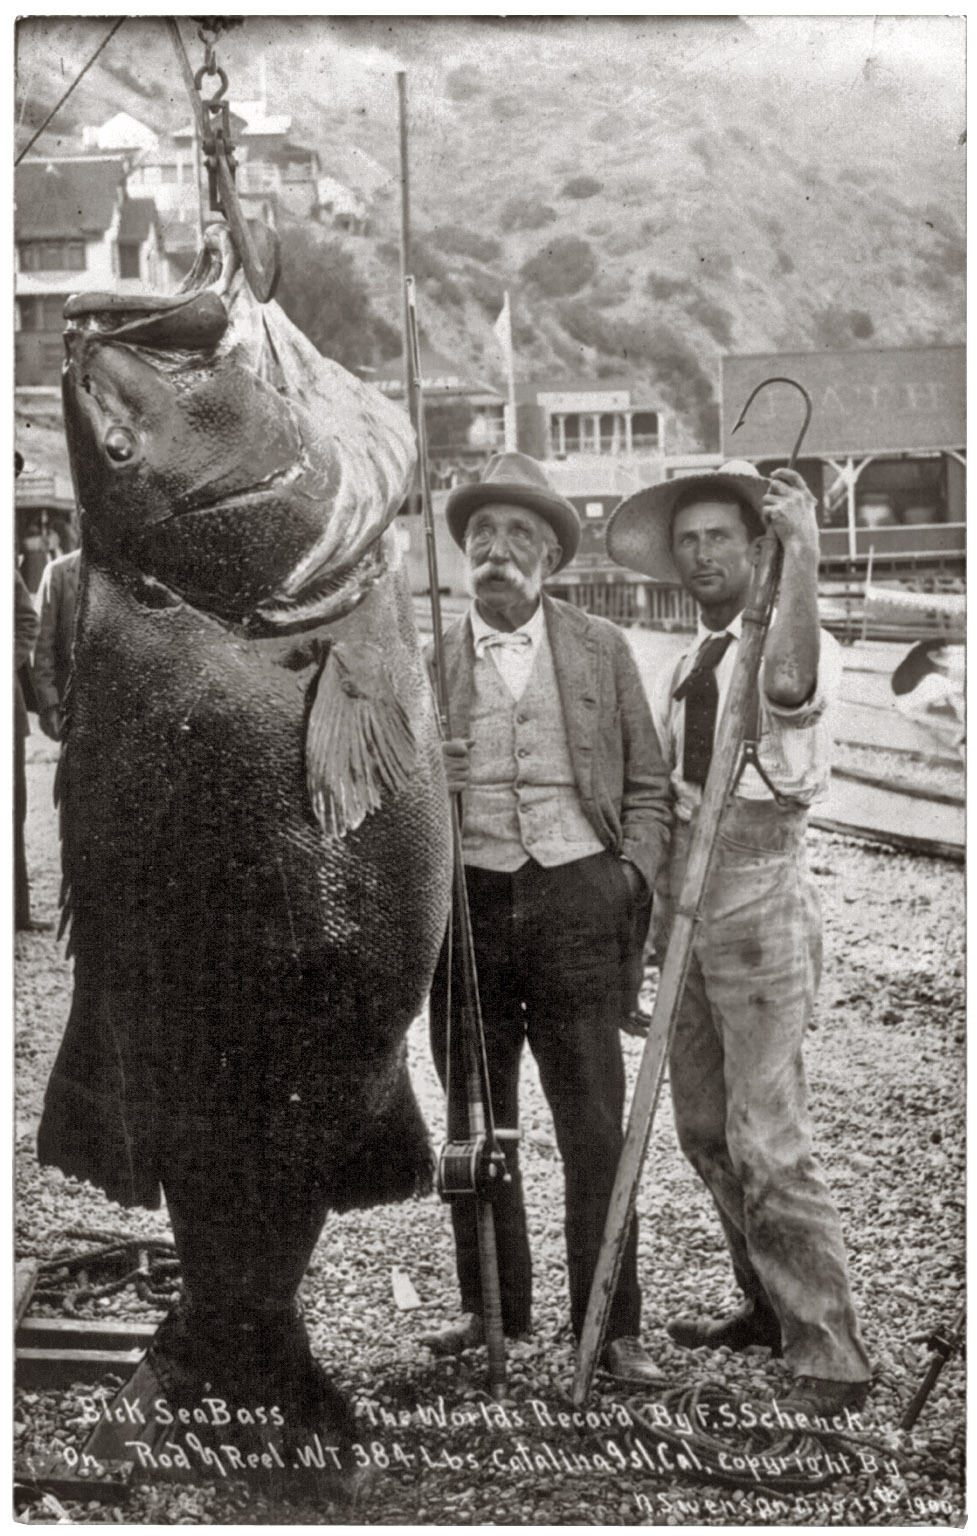 A world's record 384-pound black sea bass caught by Franklin Schenck of Brooklyn with rod and reel off Catalina Island, California, on August 17, 1900. View full size